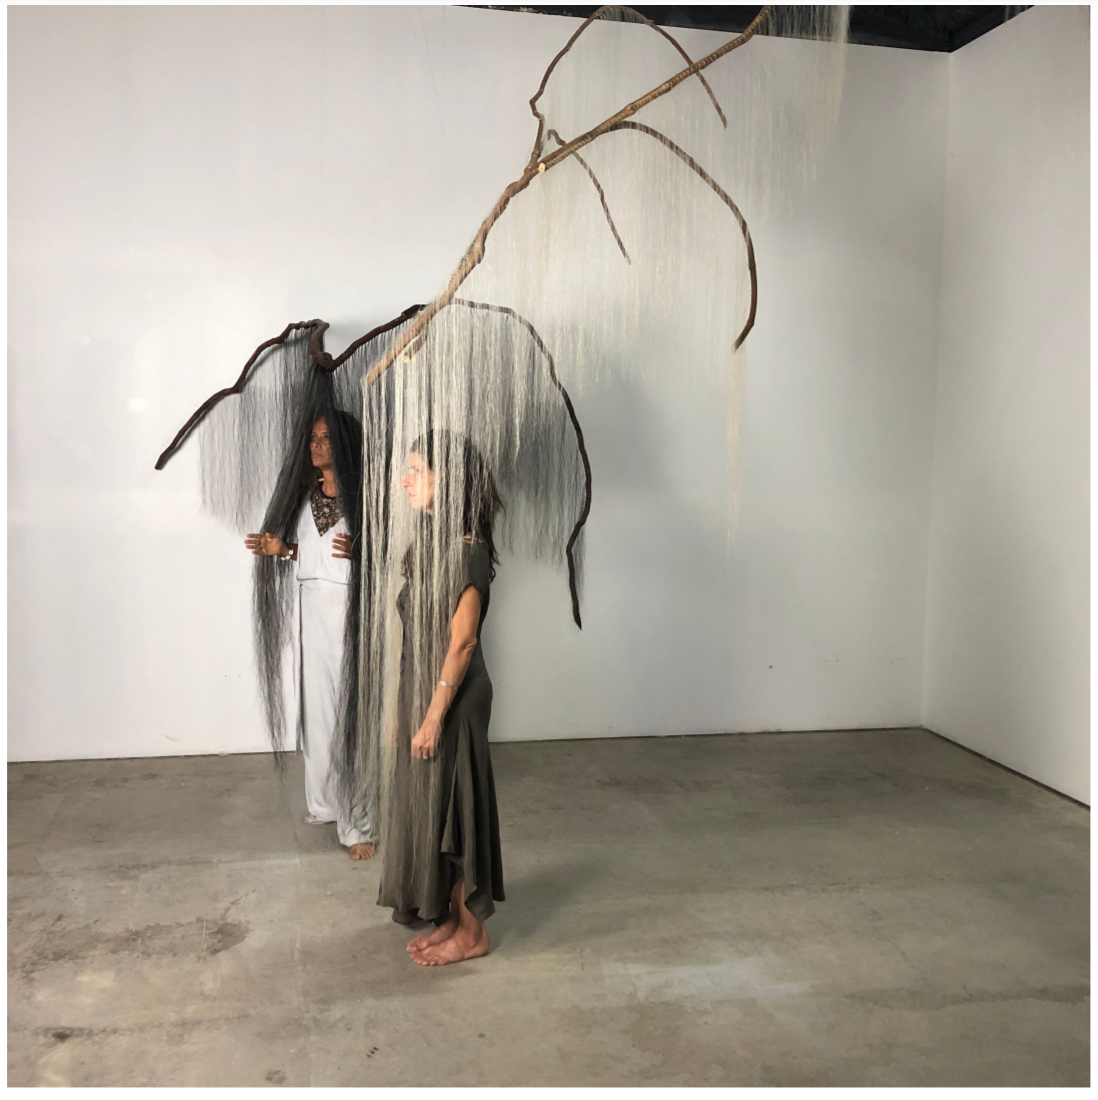 Two women, one a long white dress and one with gray, stand in an empty, white-walled studio with large branches dangling over their heads. From the branches hang many thin threads that cover the women's heads.